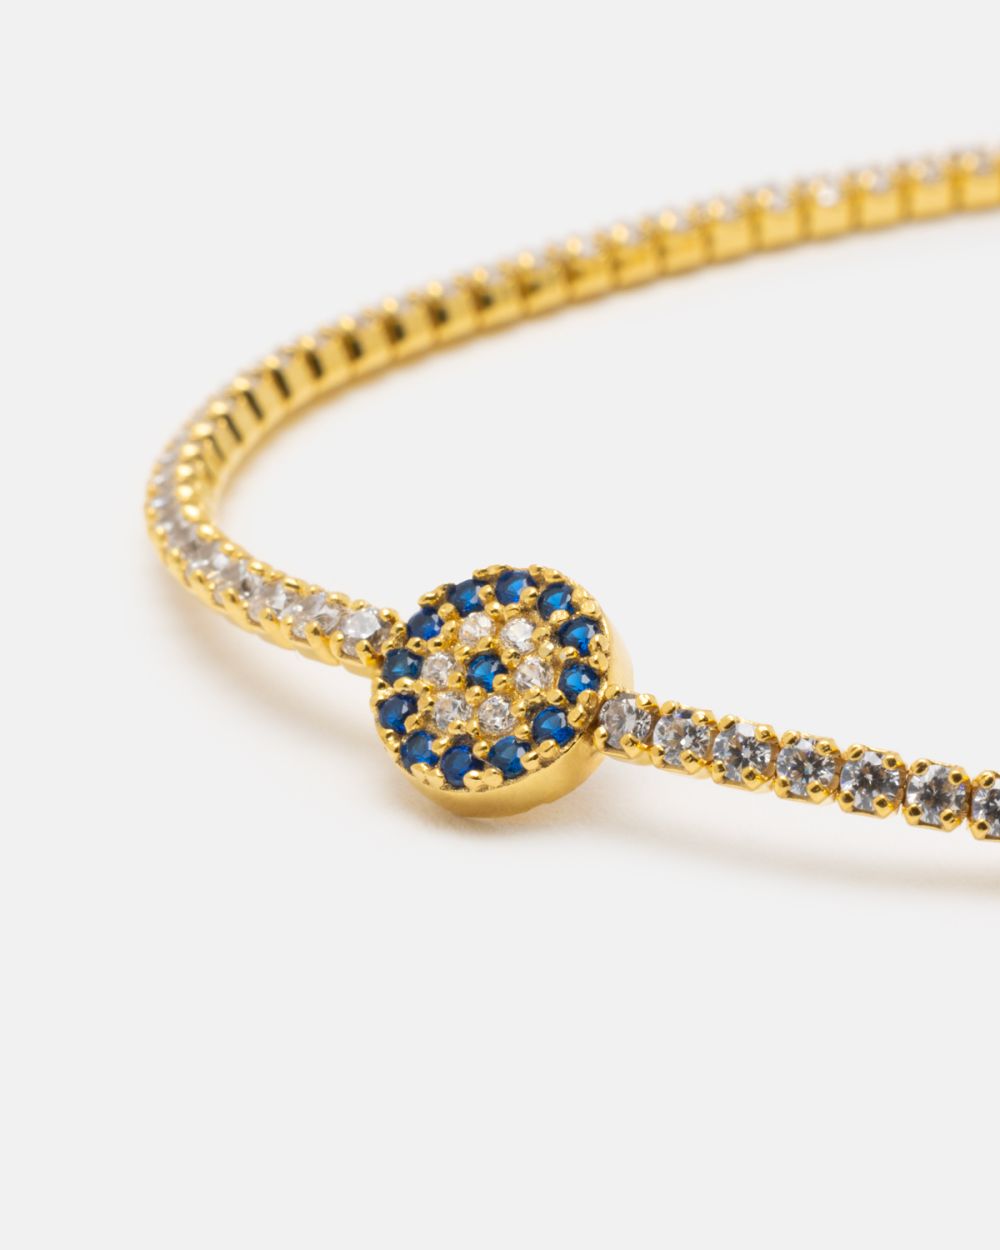 Mati Bracelet in Gold Plated Silver with Zirconias